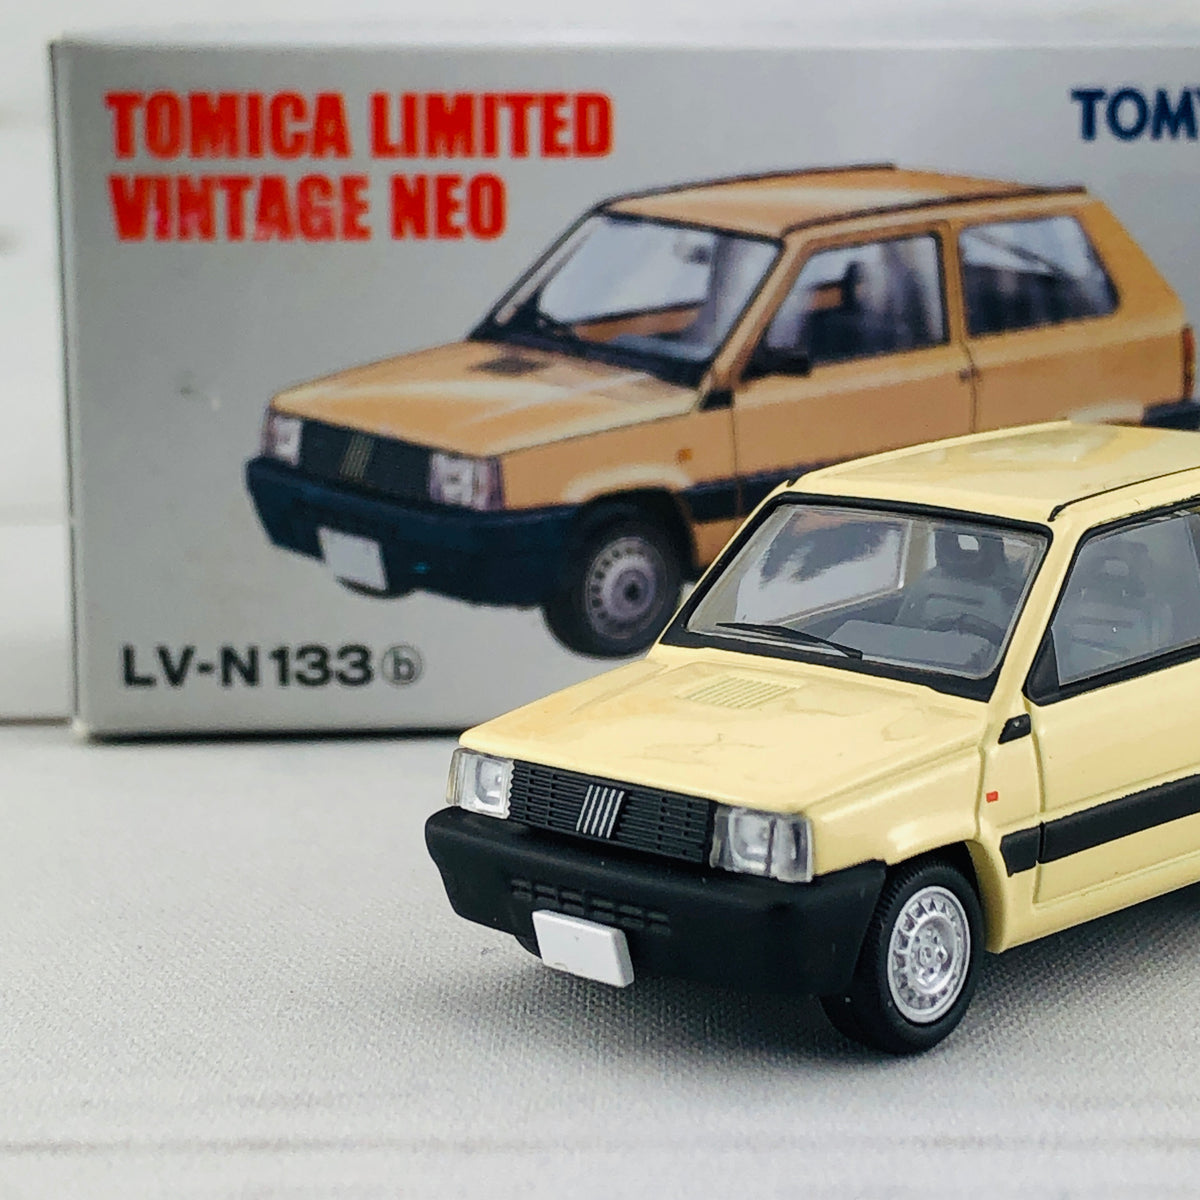 Minicar 1/64 LV-N239a Fiat Panda 1000 cl (Light Blue) Tomica Limited  Vintage NEO [318330], Toy Hobby